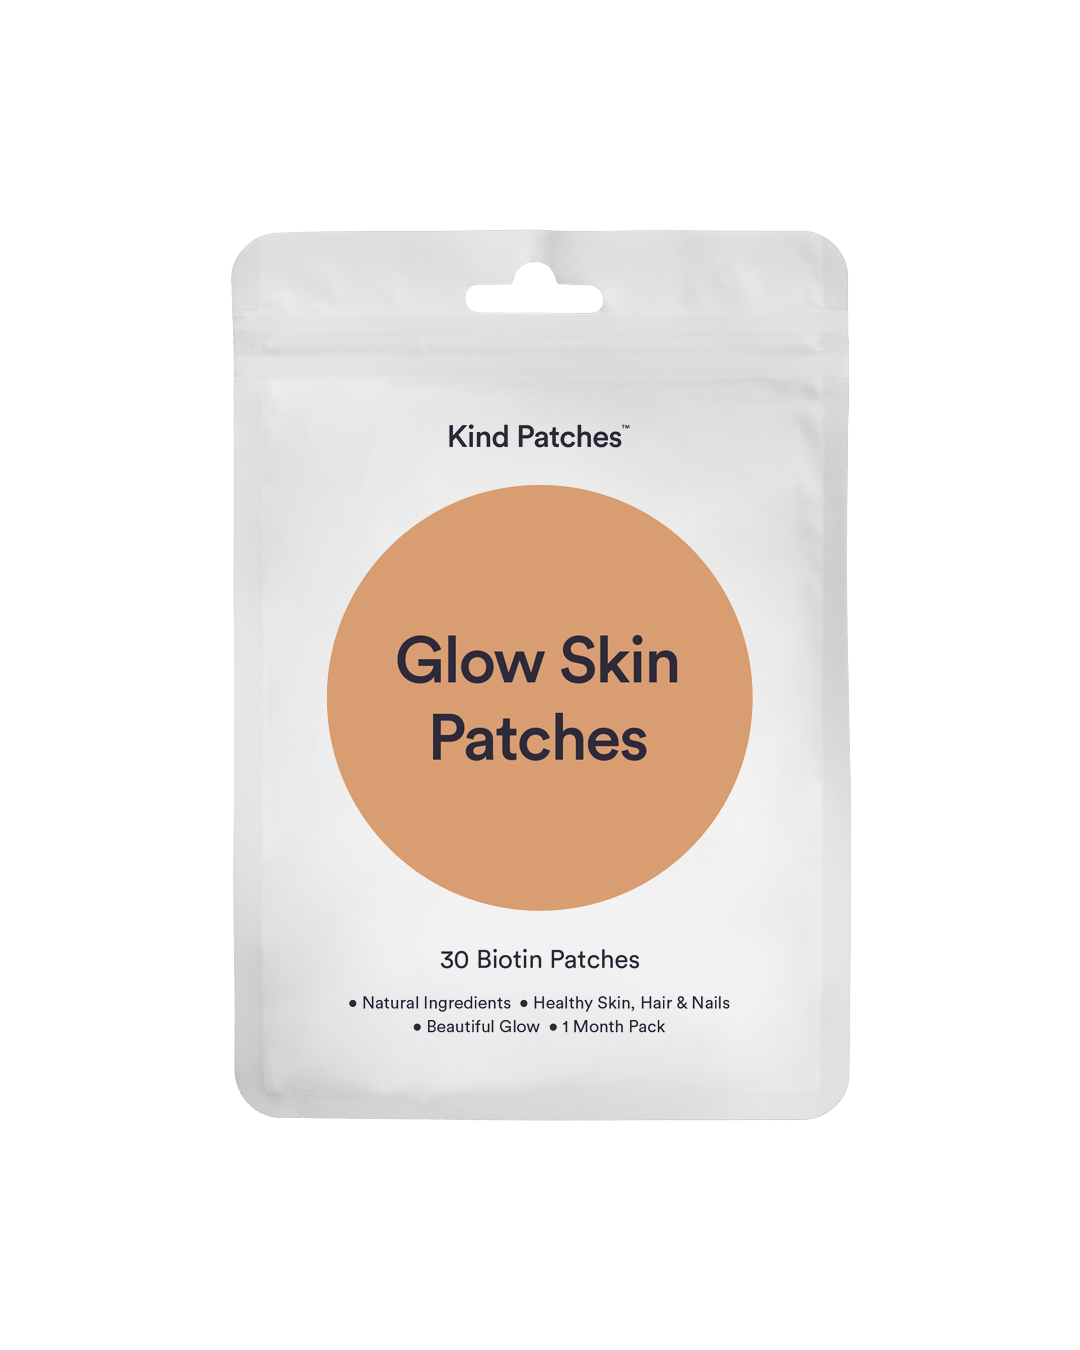 Glow Skin Patches